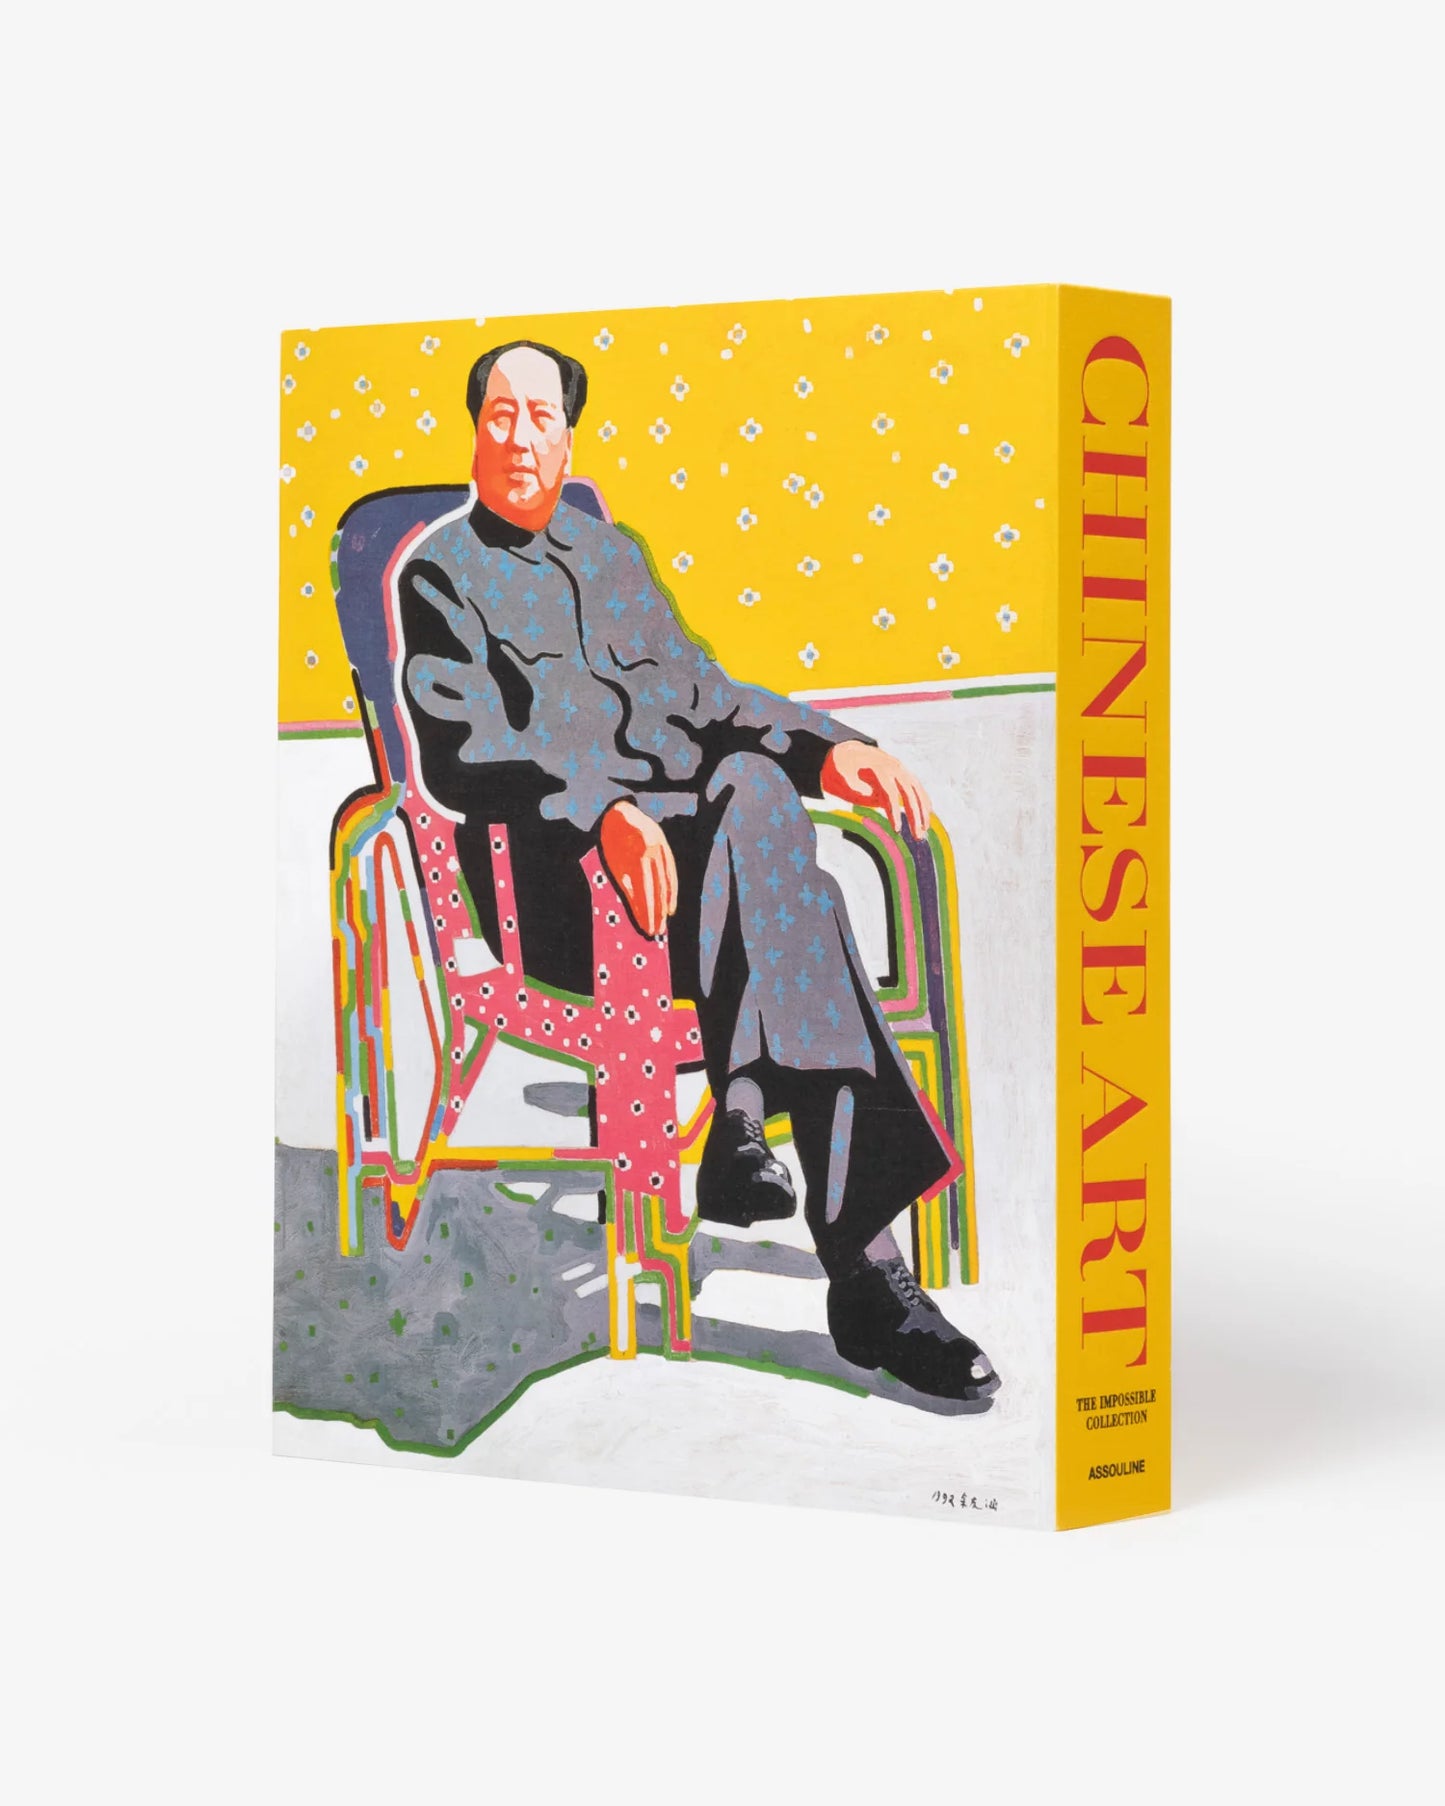 Book Chinese Art: Impossible Collection